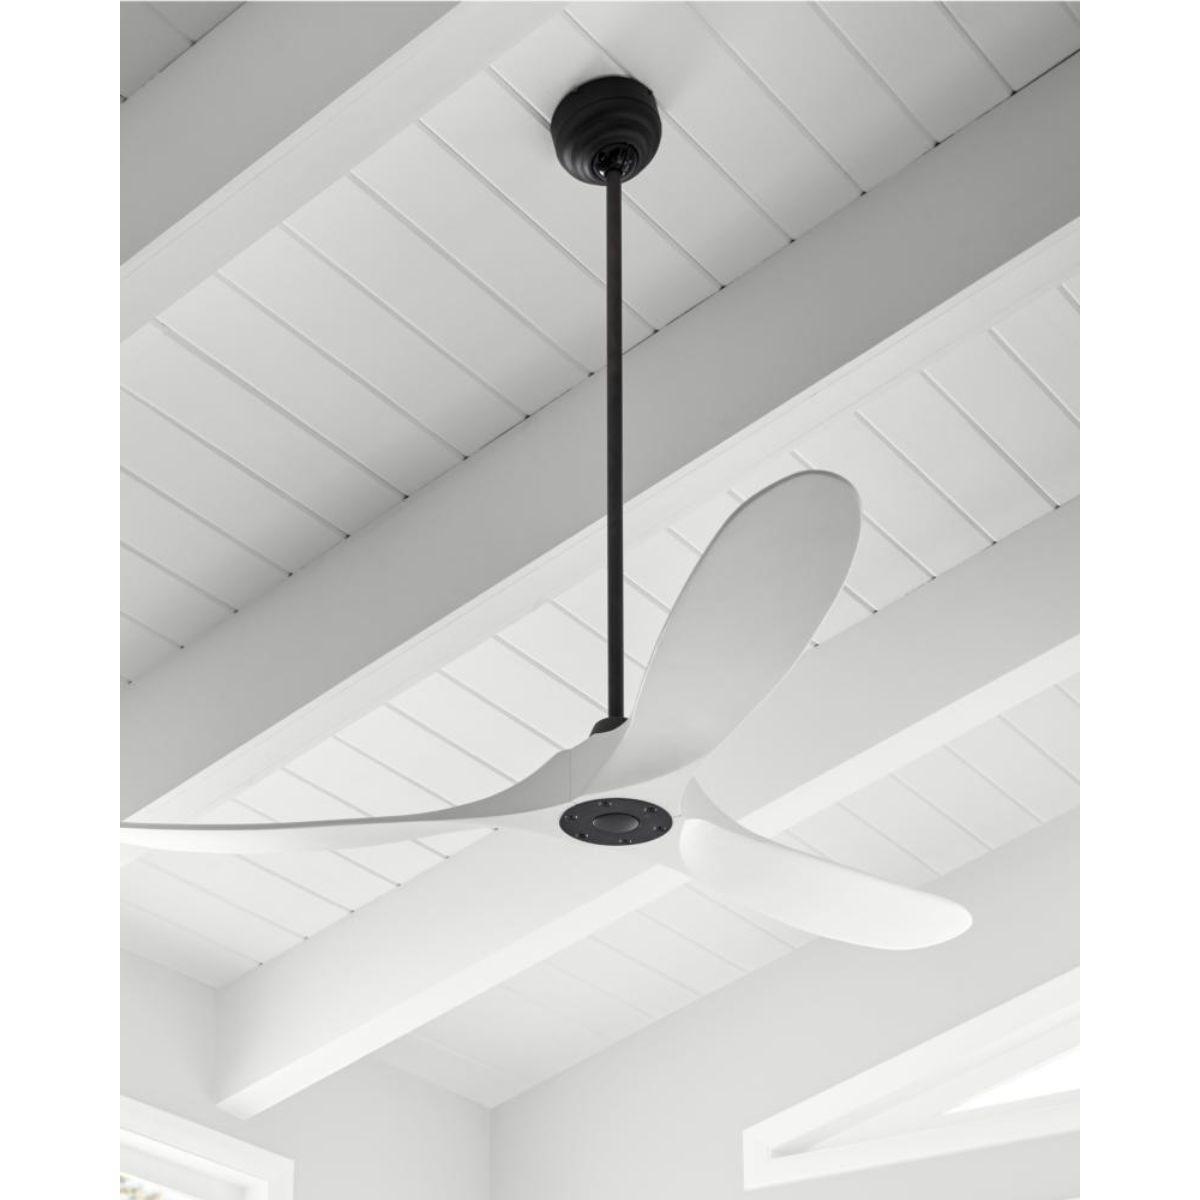 Maverick 60 Inch LED Modern Outdoor Ceiling Fan With Light And Remote - Bees Lighting